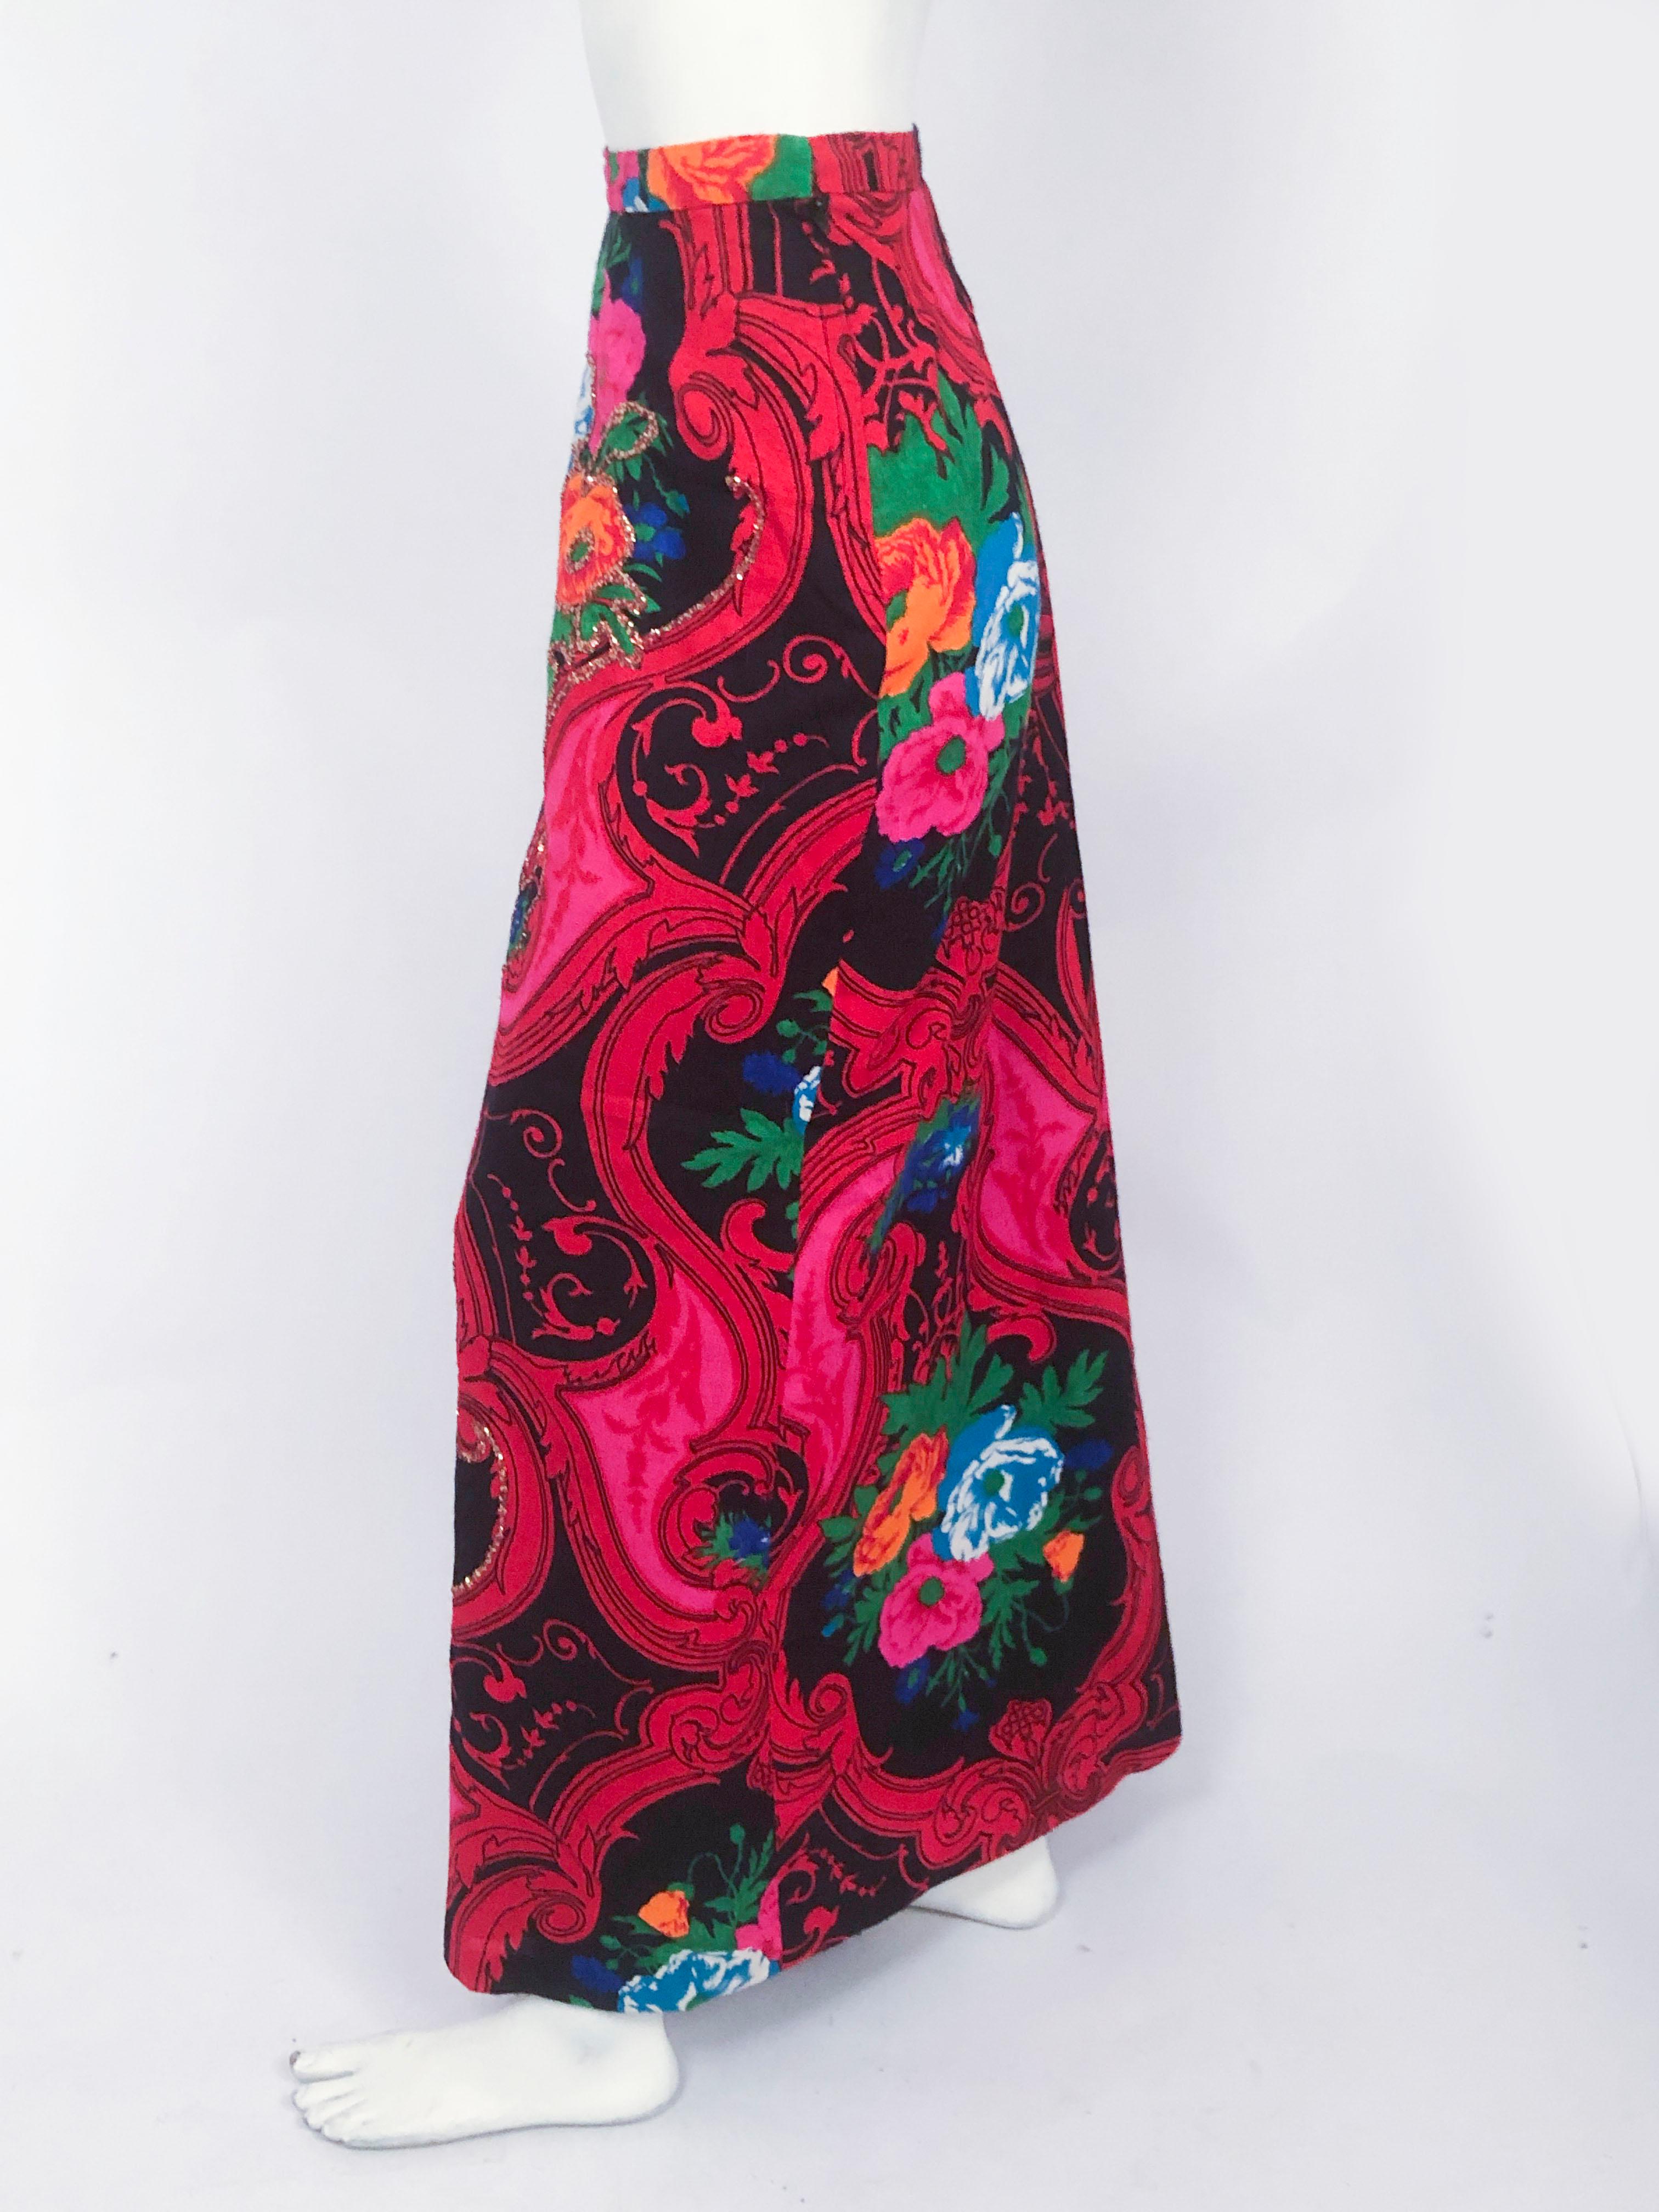 Saks Fifth Ave woven skirt with psychedelic floral and baroque print featuring bold colors and hand glittered outline on the front